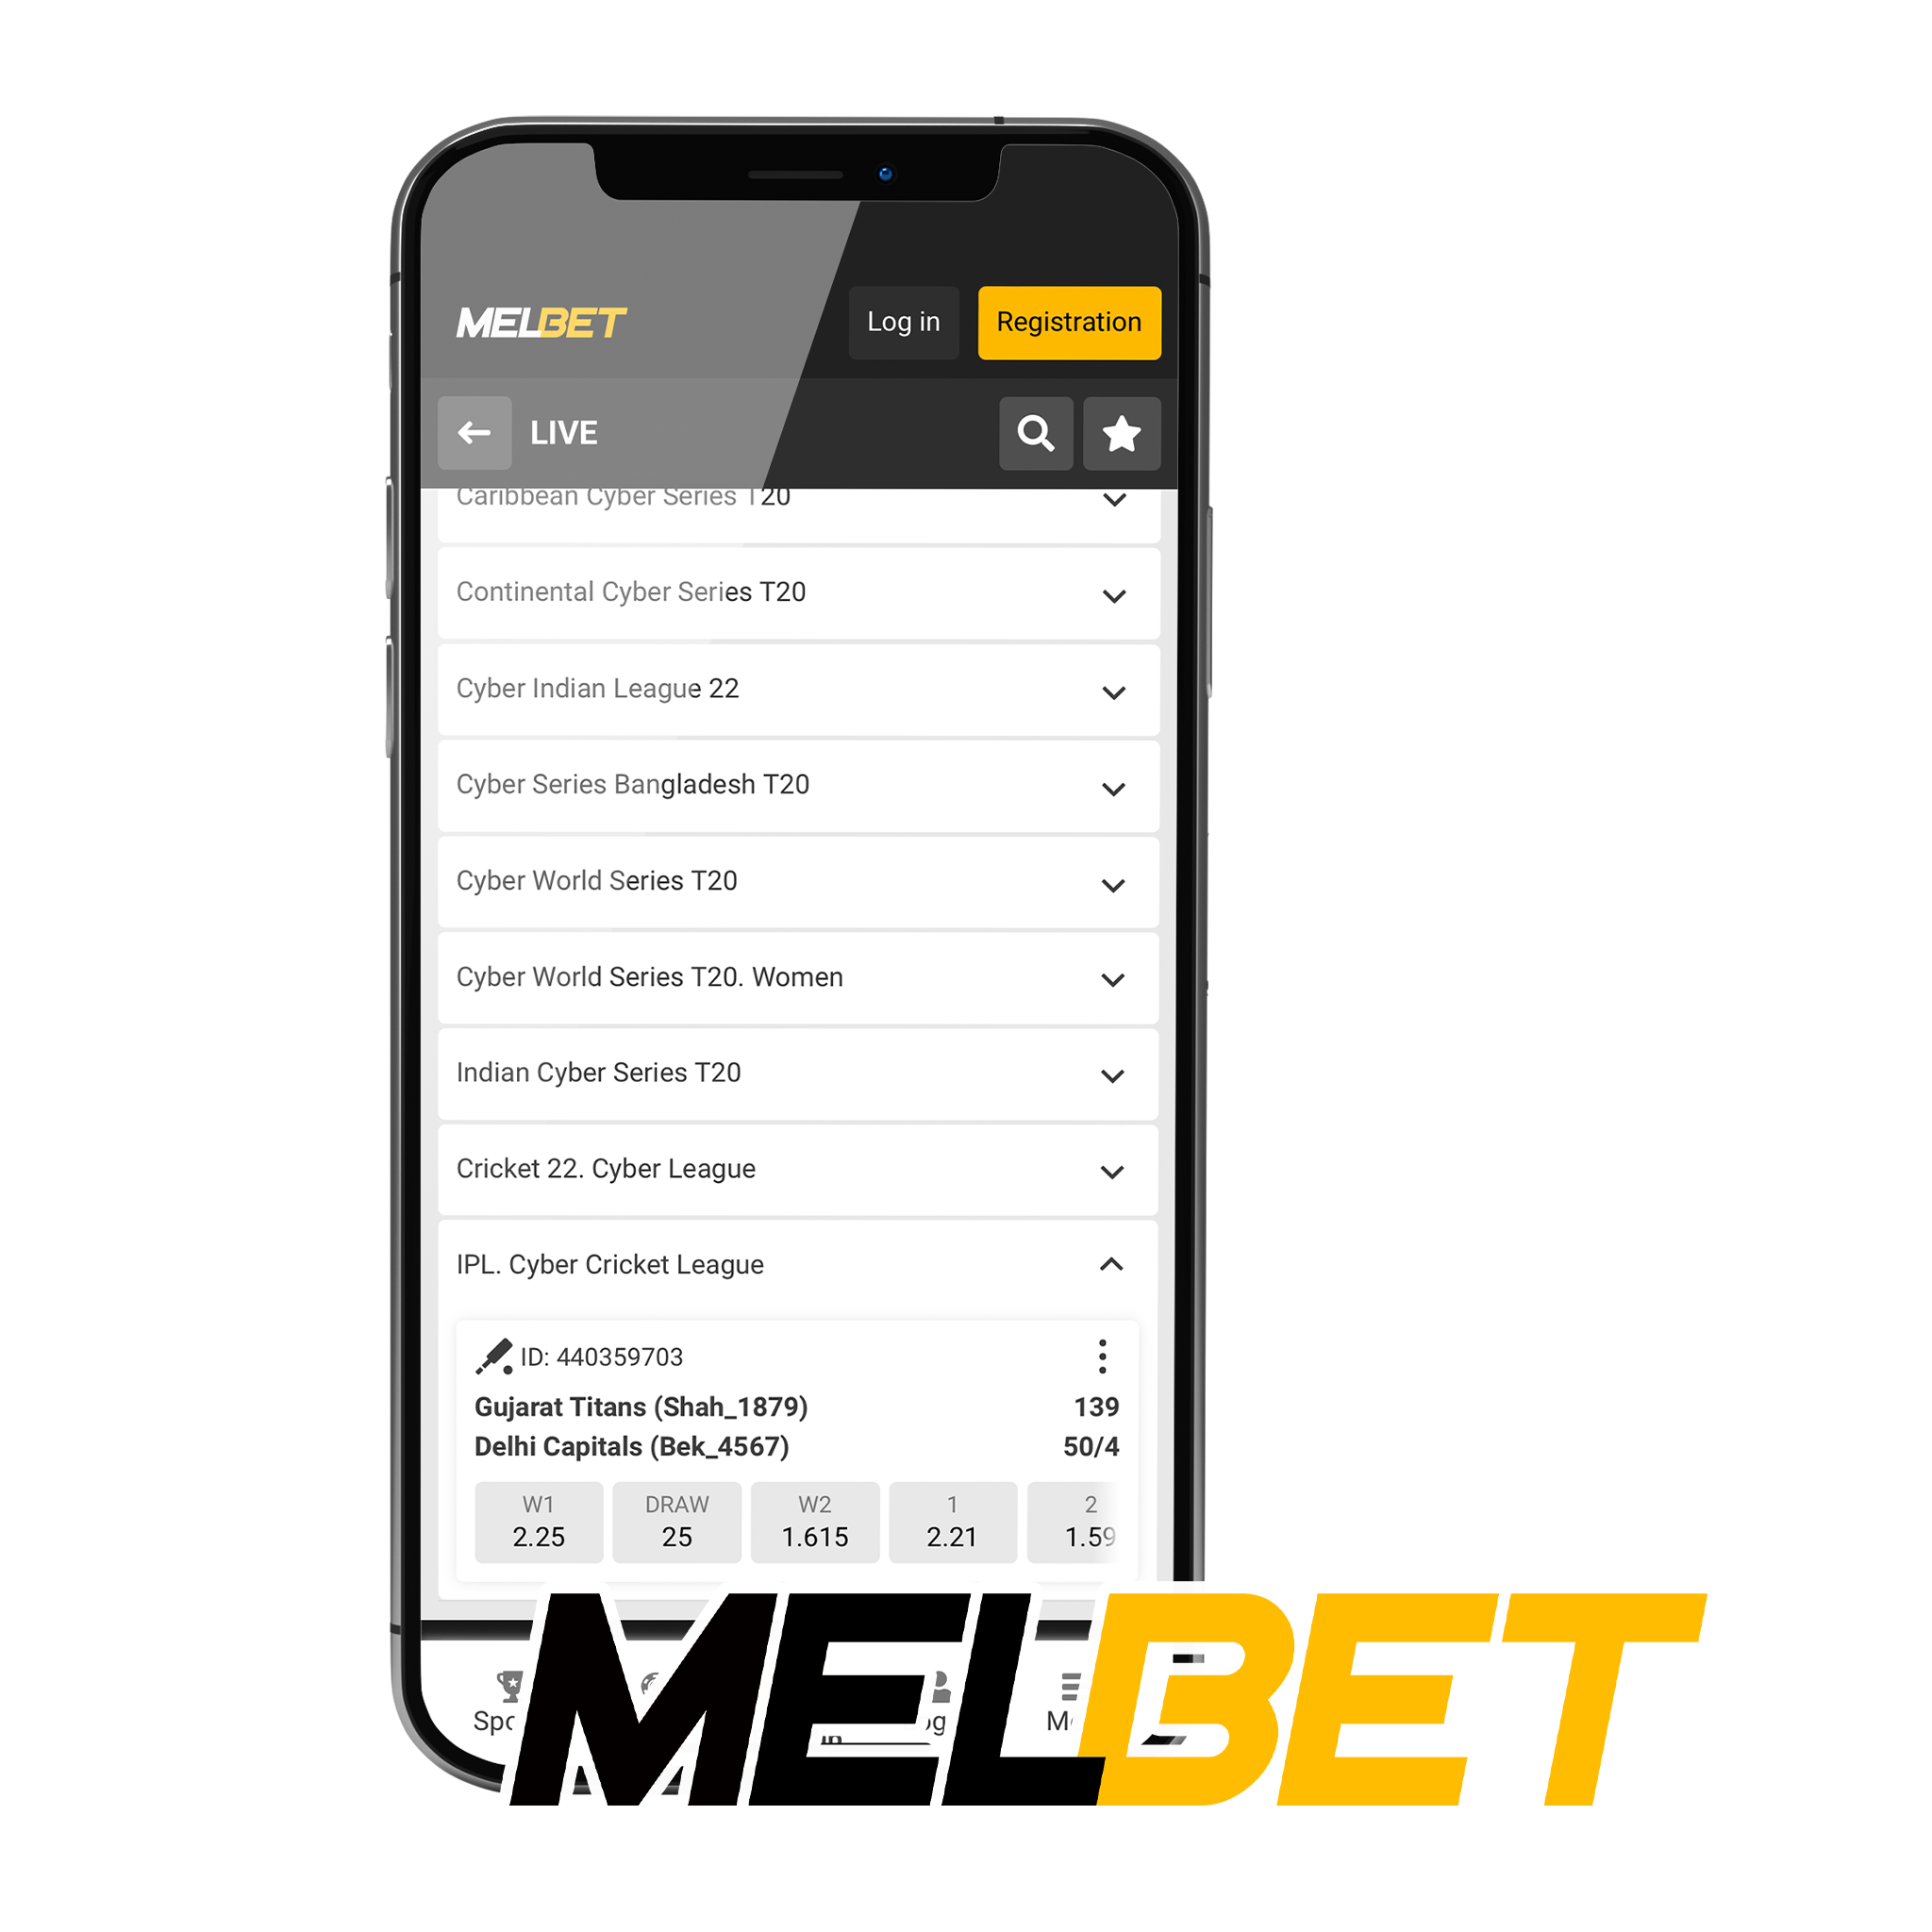 Choose the Melbet app for betting on the favorite IPL cricket teams.